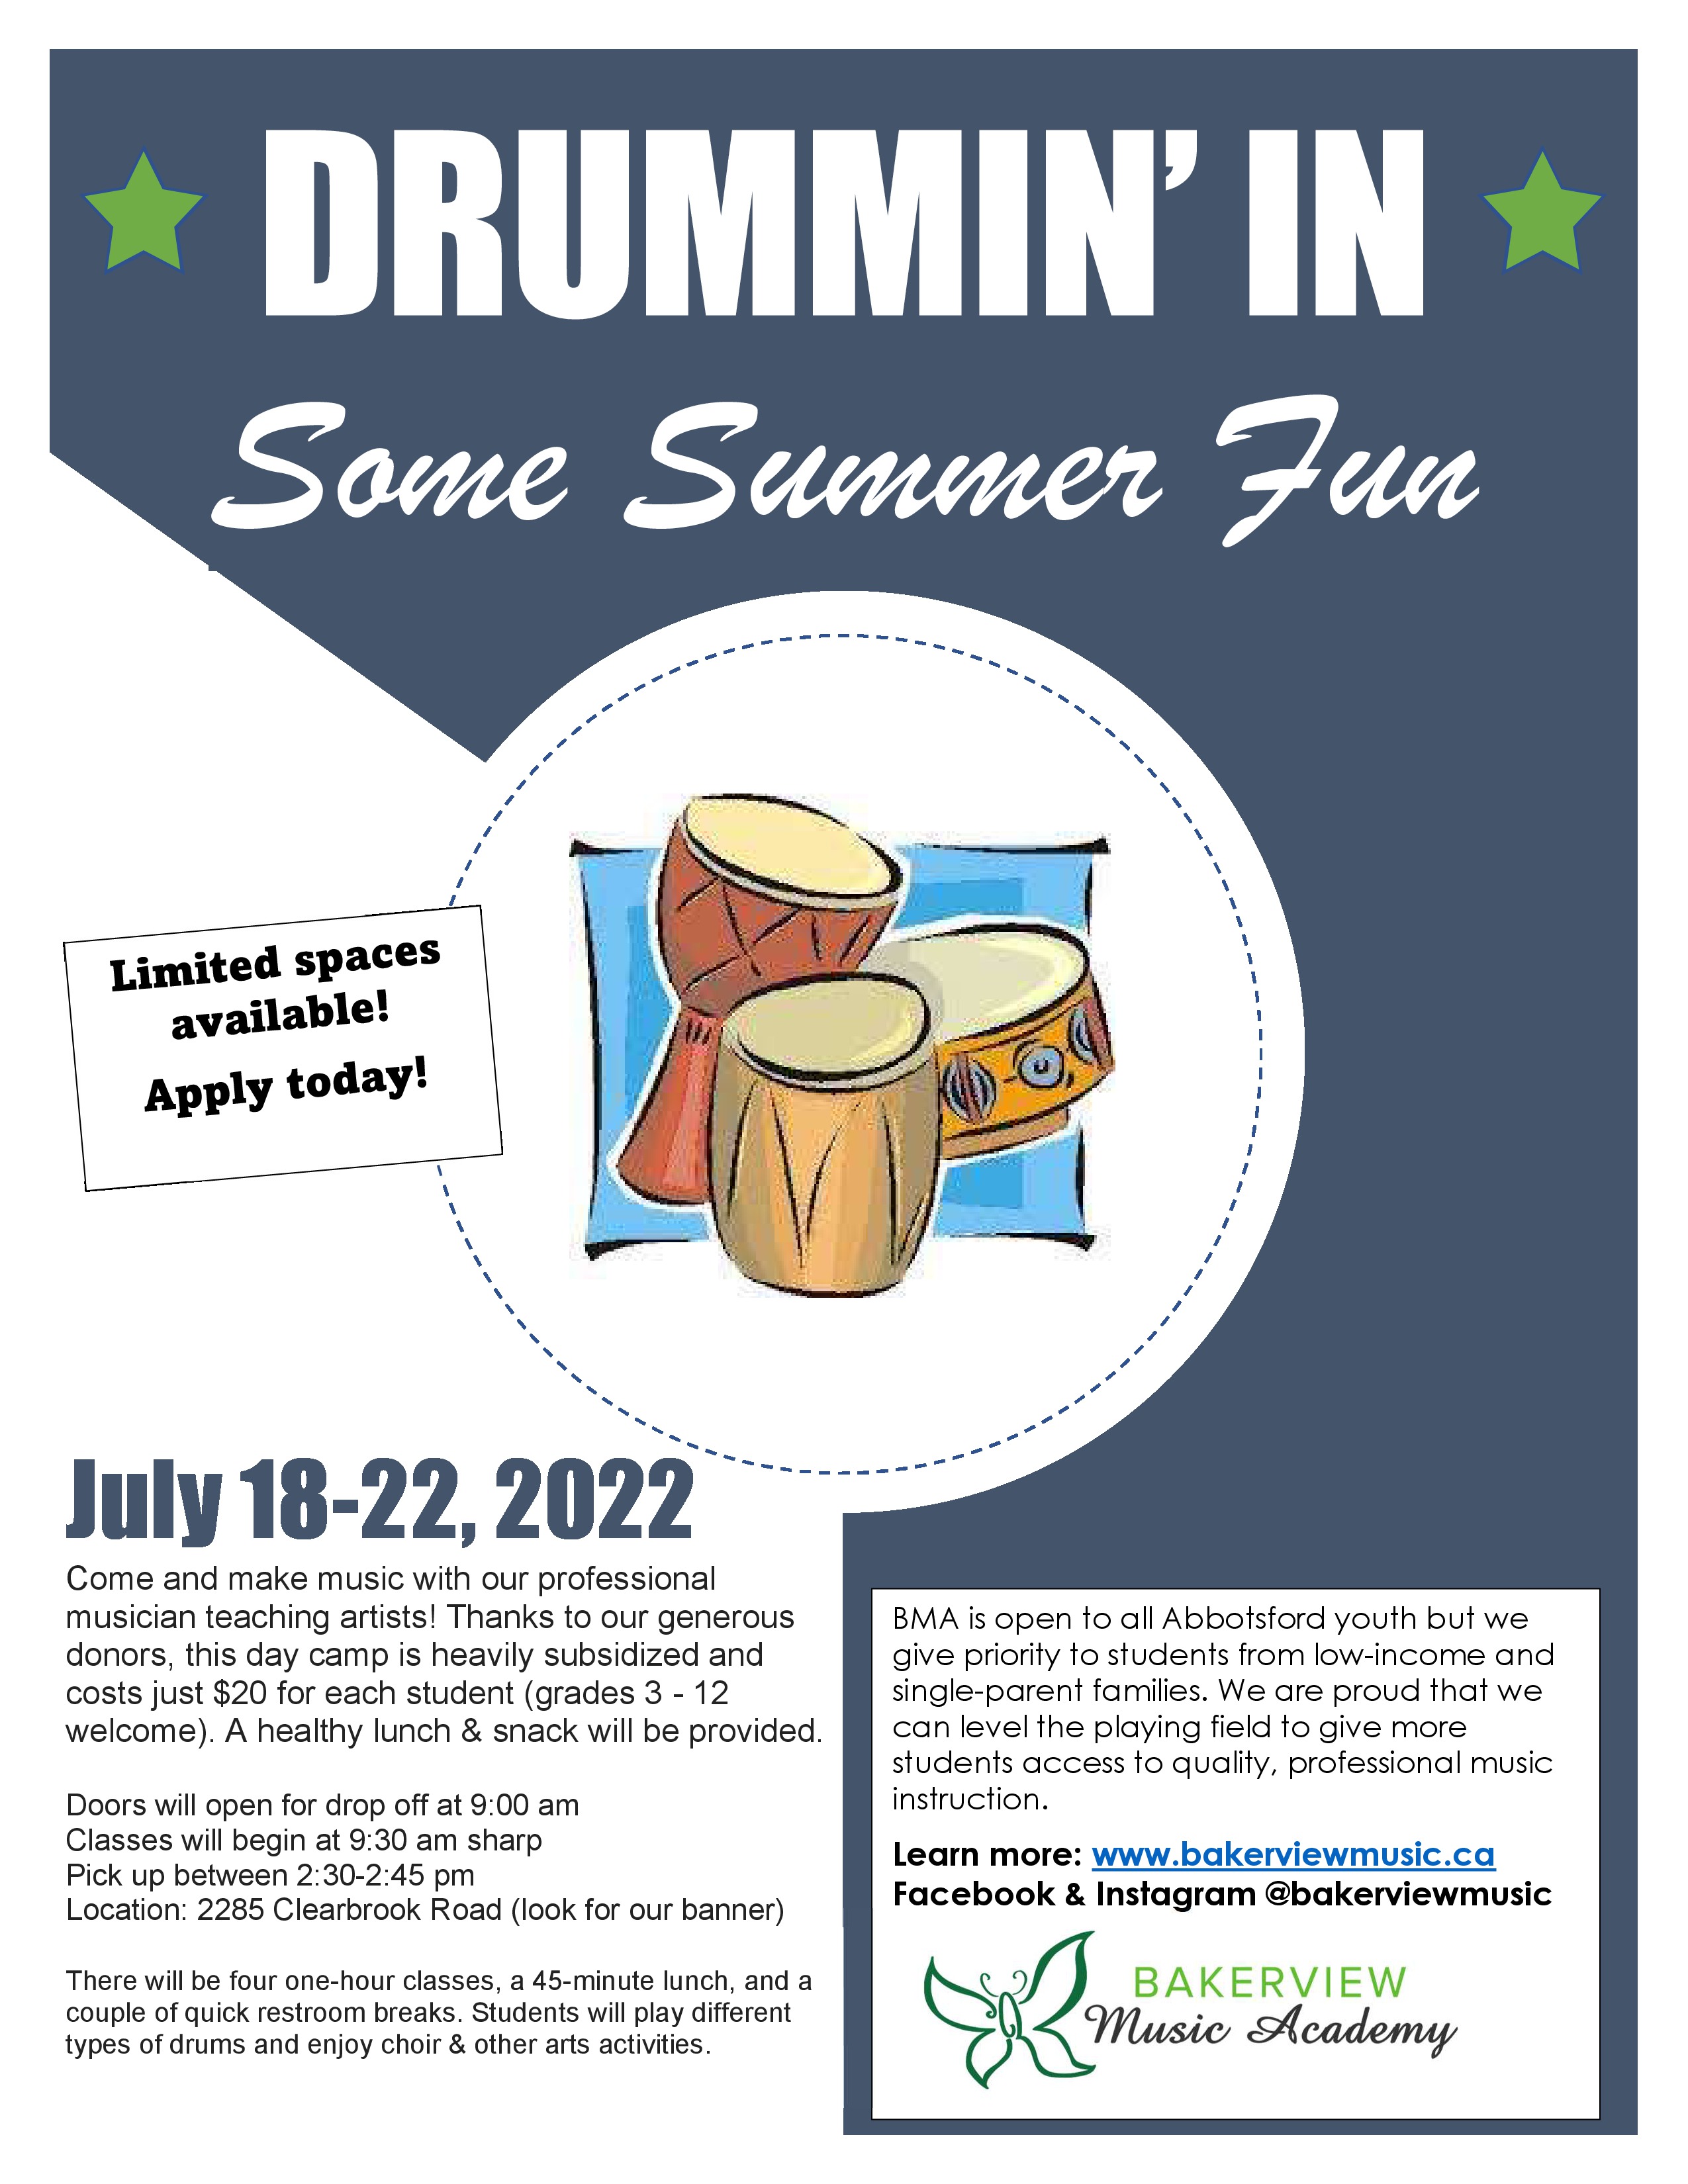 We’re going to be drumming in some summer fun in July 2022!